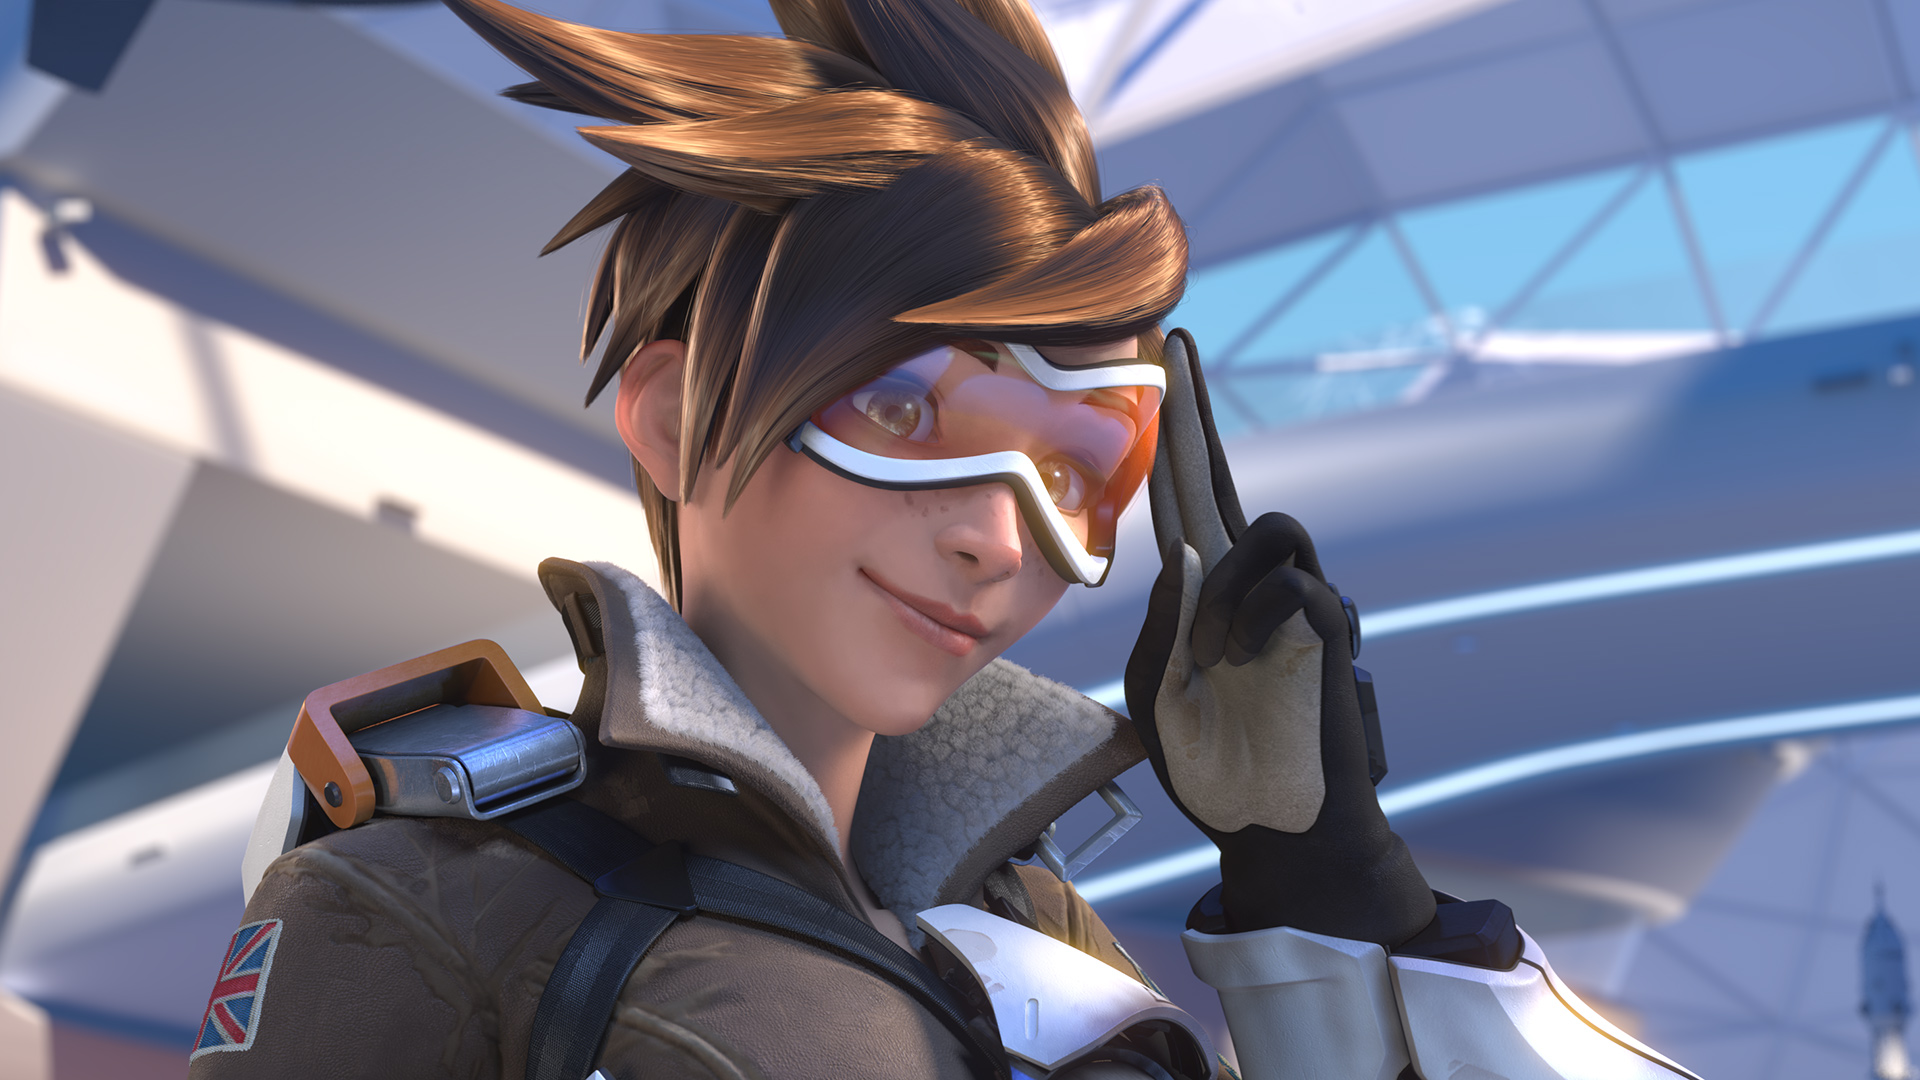 HD wallpaper: Tracer from Overwatch wallpaper, Tracer (Overwatch), one  person